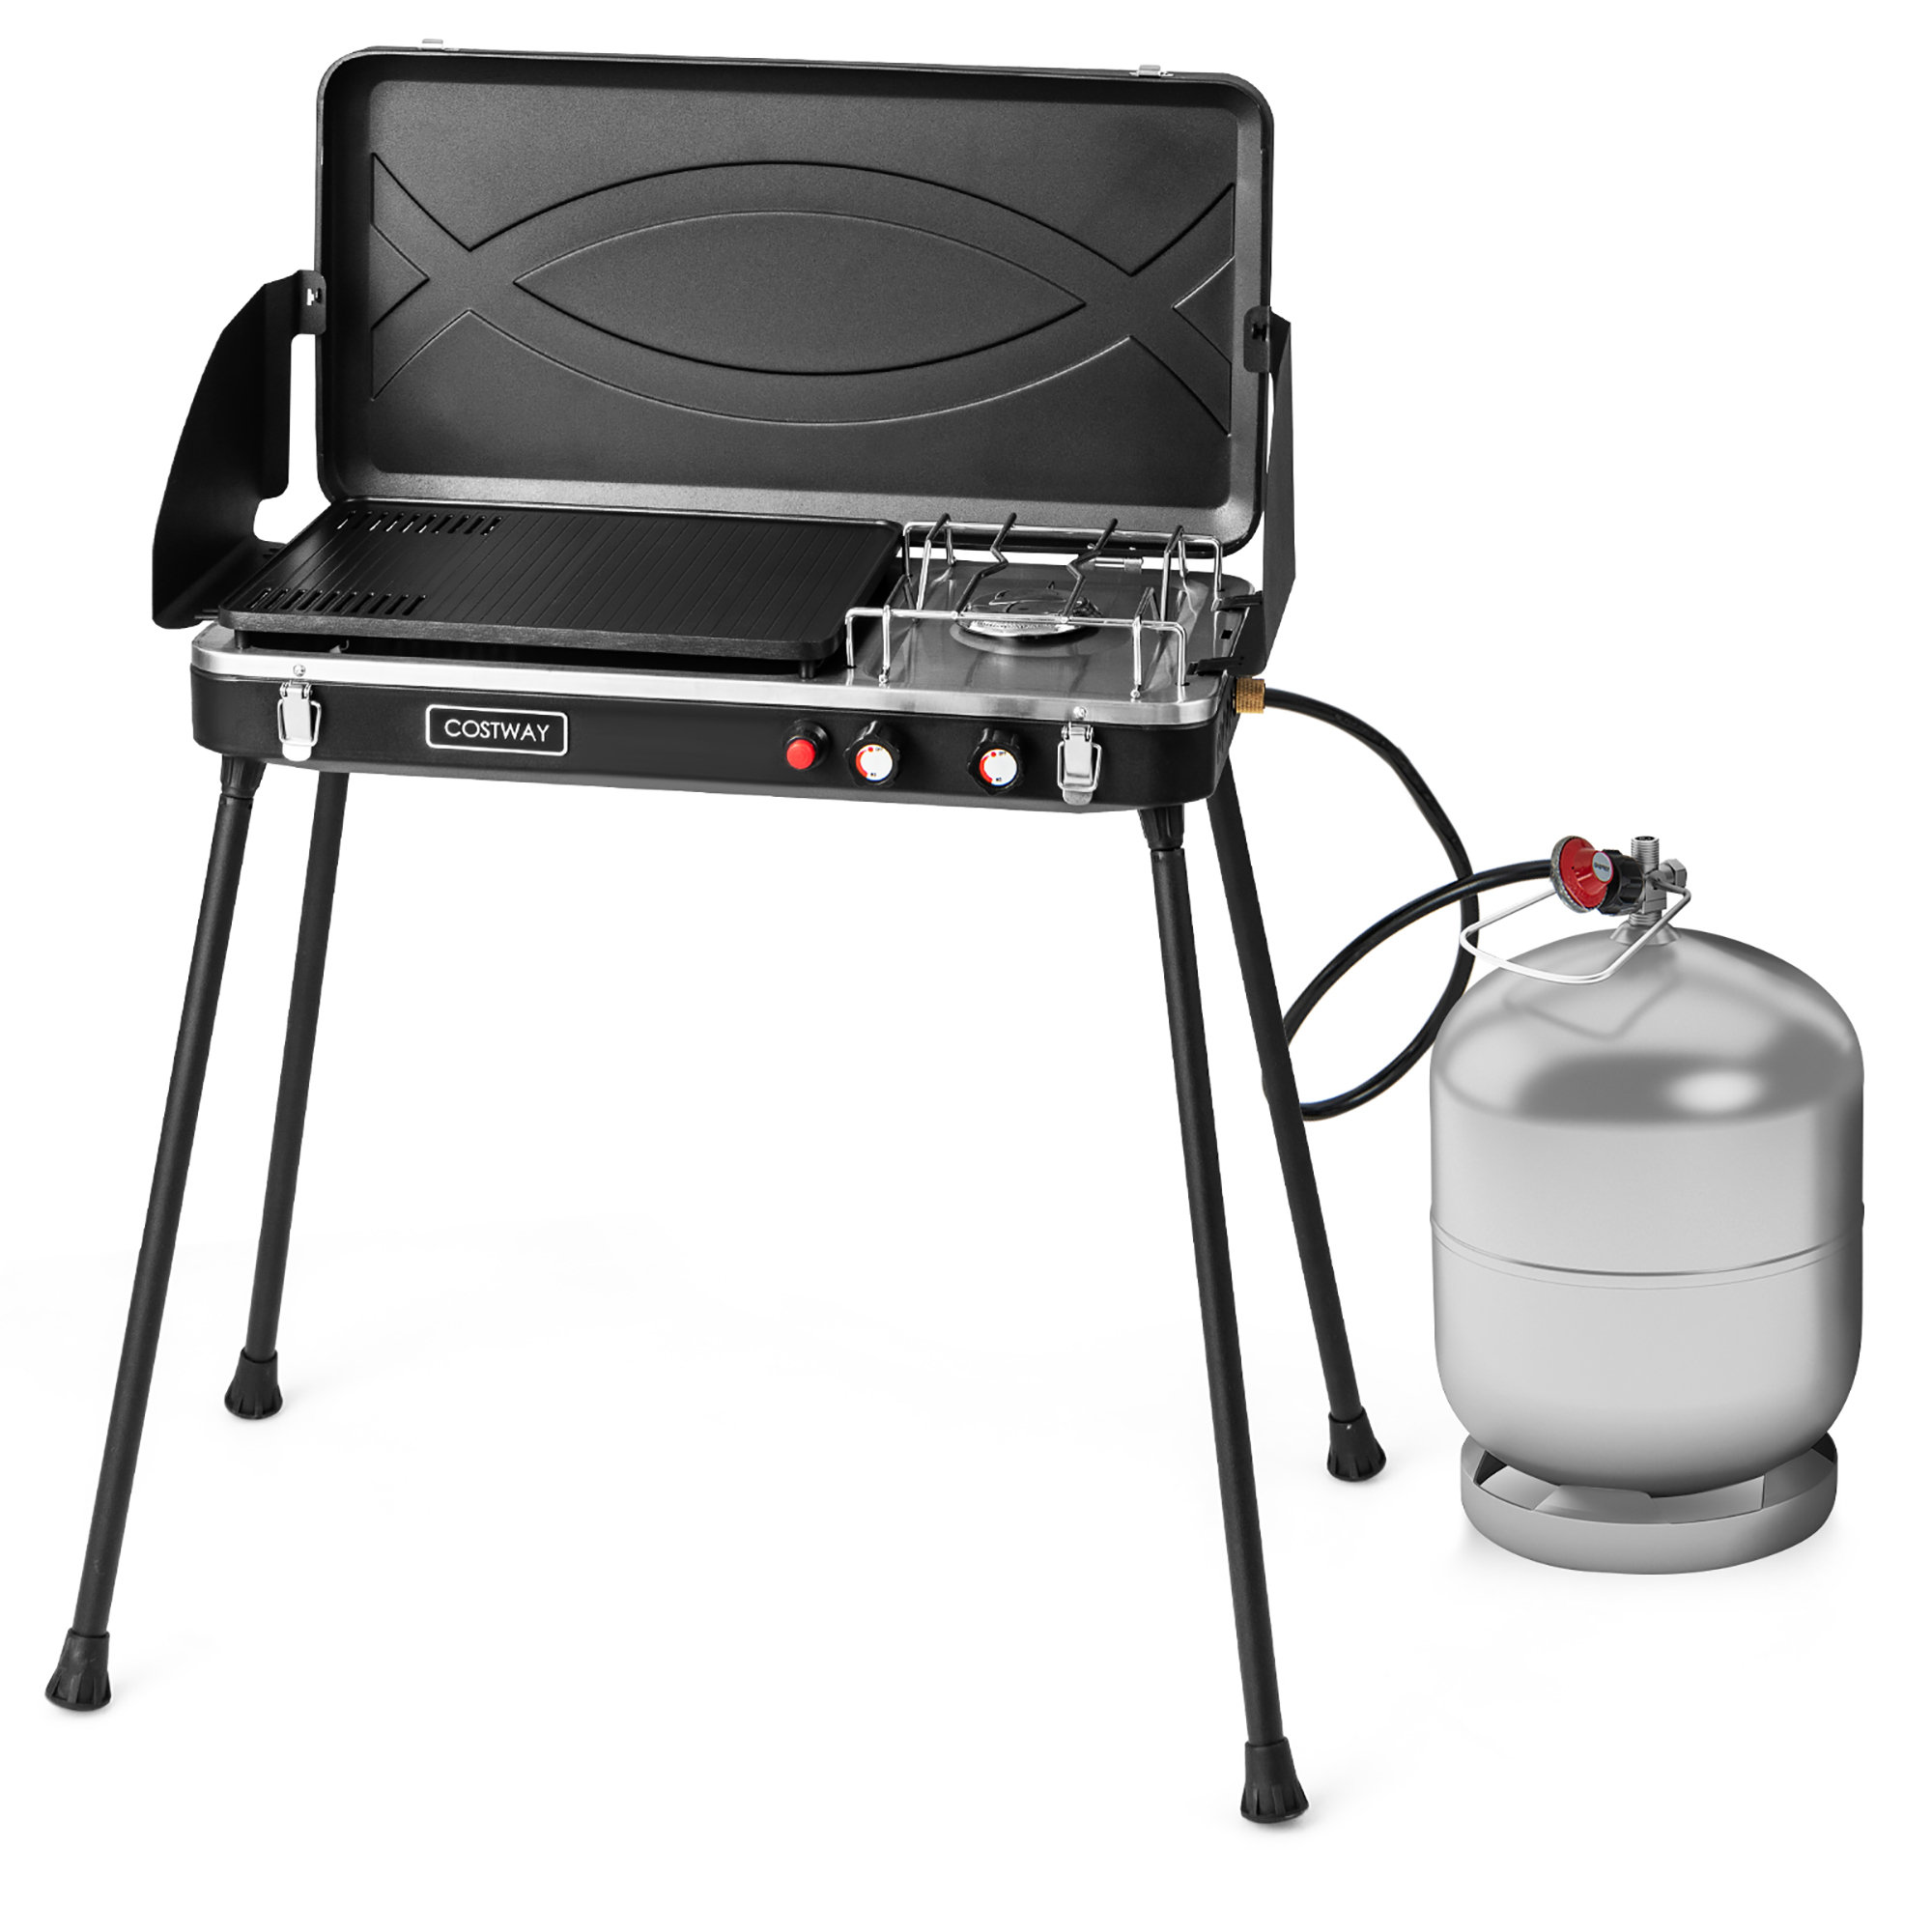 Flame King RV or Trailer Mounted BBQ - Motorhome Gas Grill 214 sq